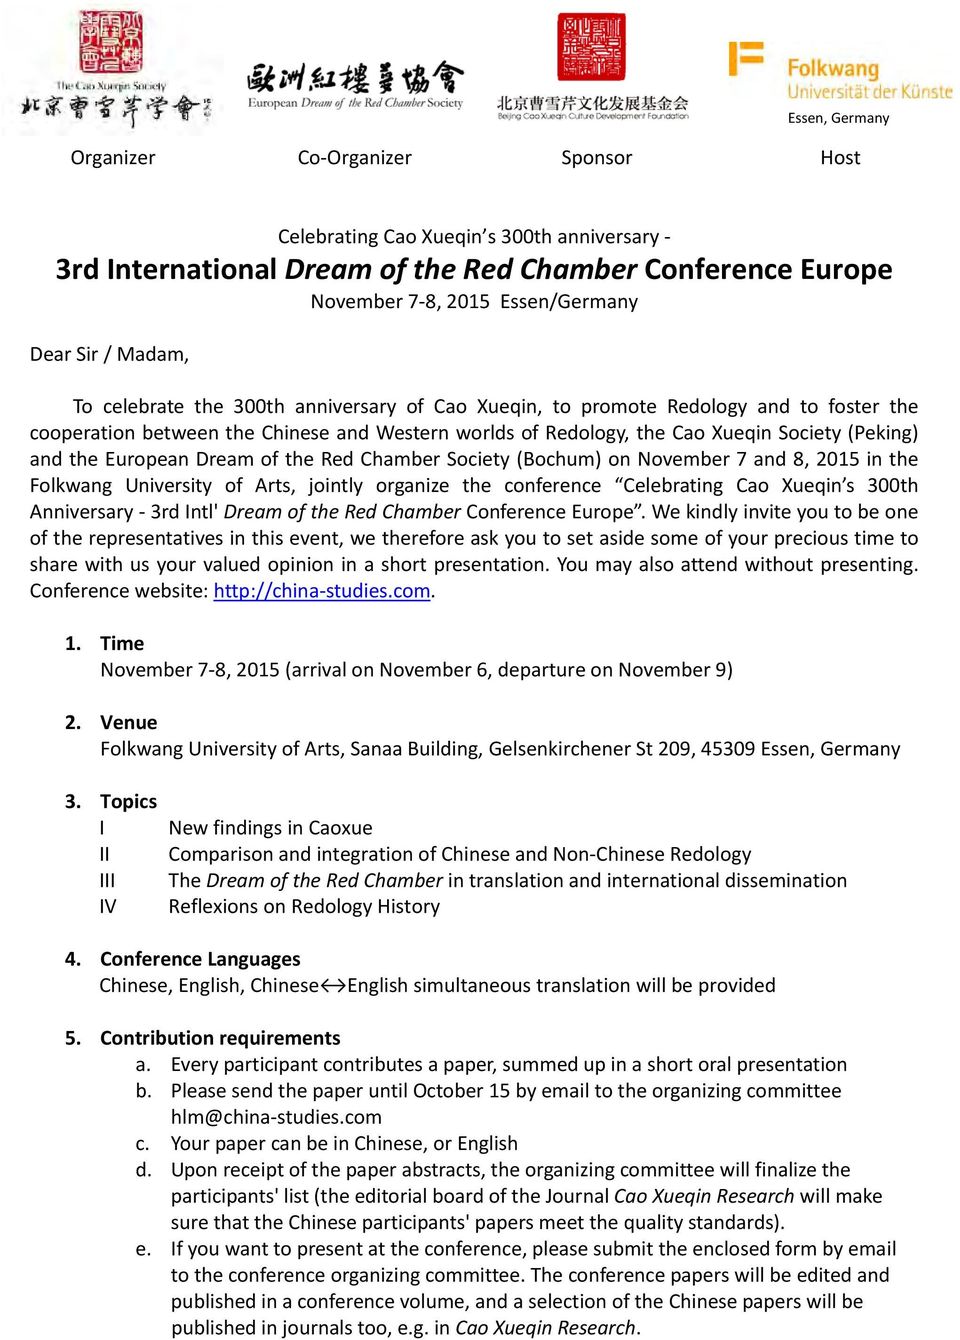 European Dream of the Red Chamber Society (Bochum) on November 7 and 8, 2015 in the Folkwang University of Arts, jointly organize the conference Celebrating Cao Xueqin s 300th Anniversary 3rd Intl'